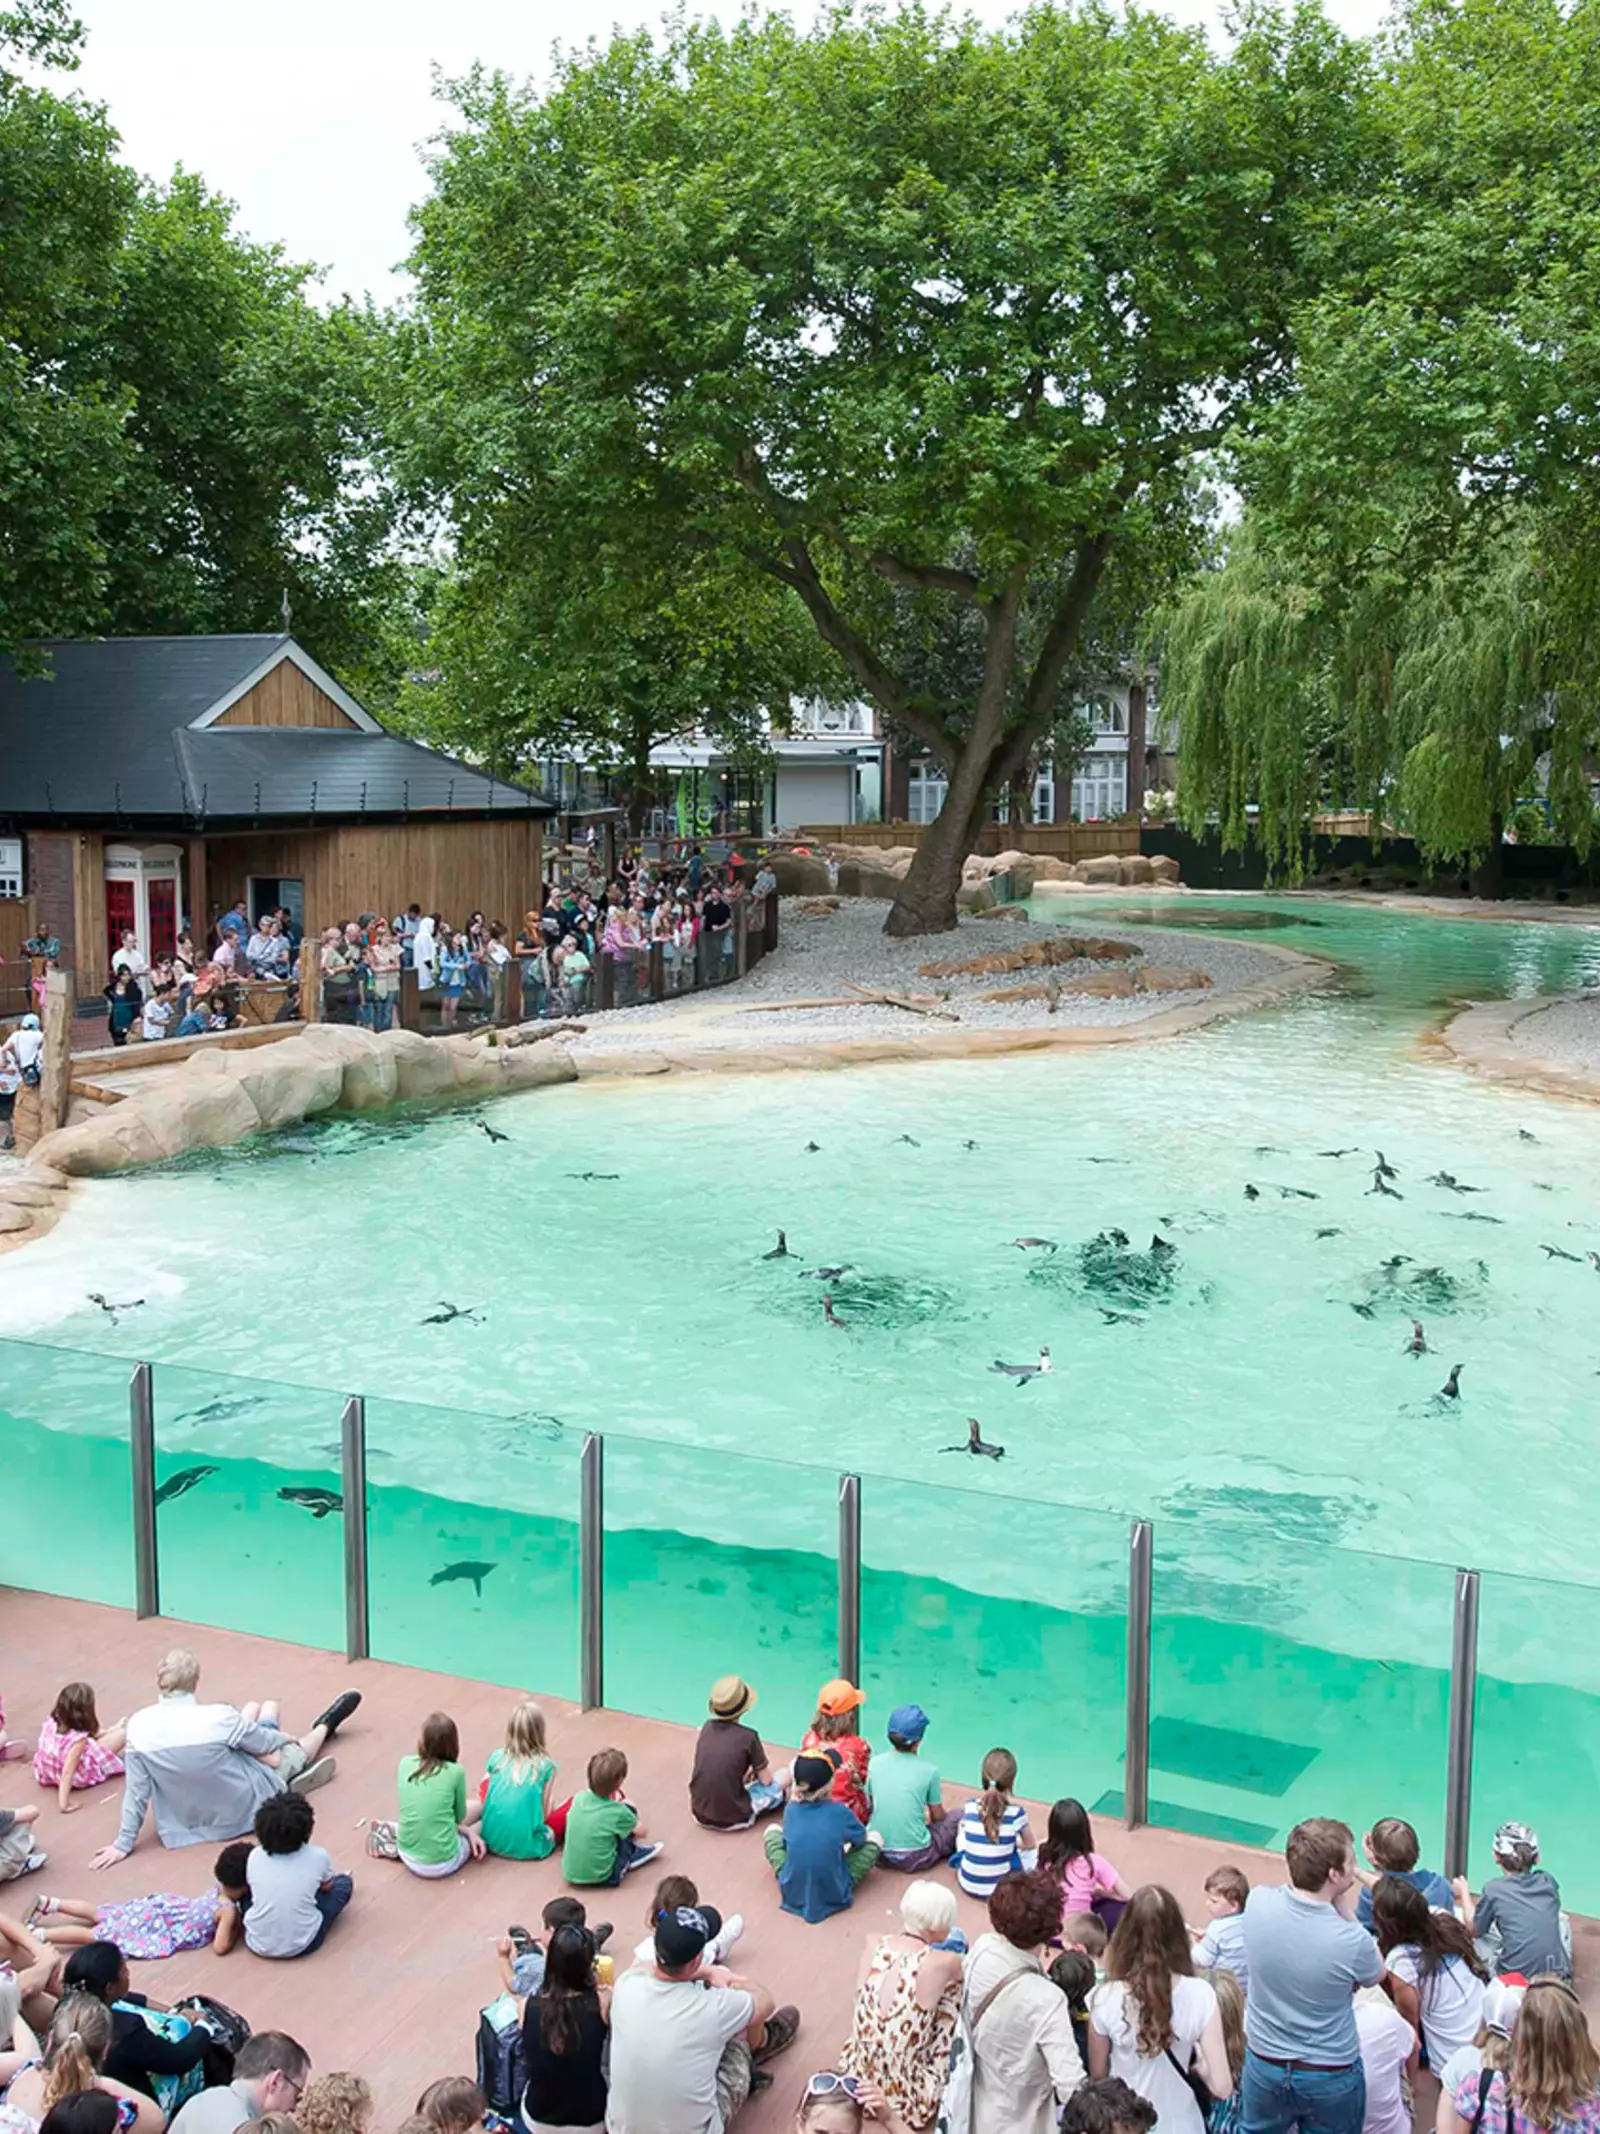 London Zoo visitors watching a live talk and feeding of the penguins at Penguin Beach